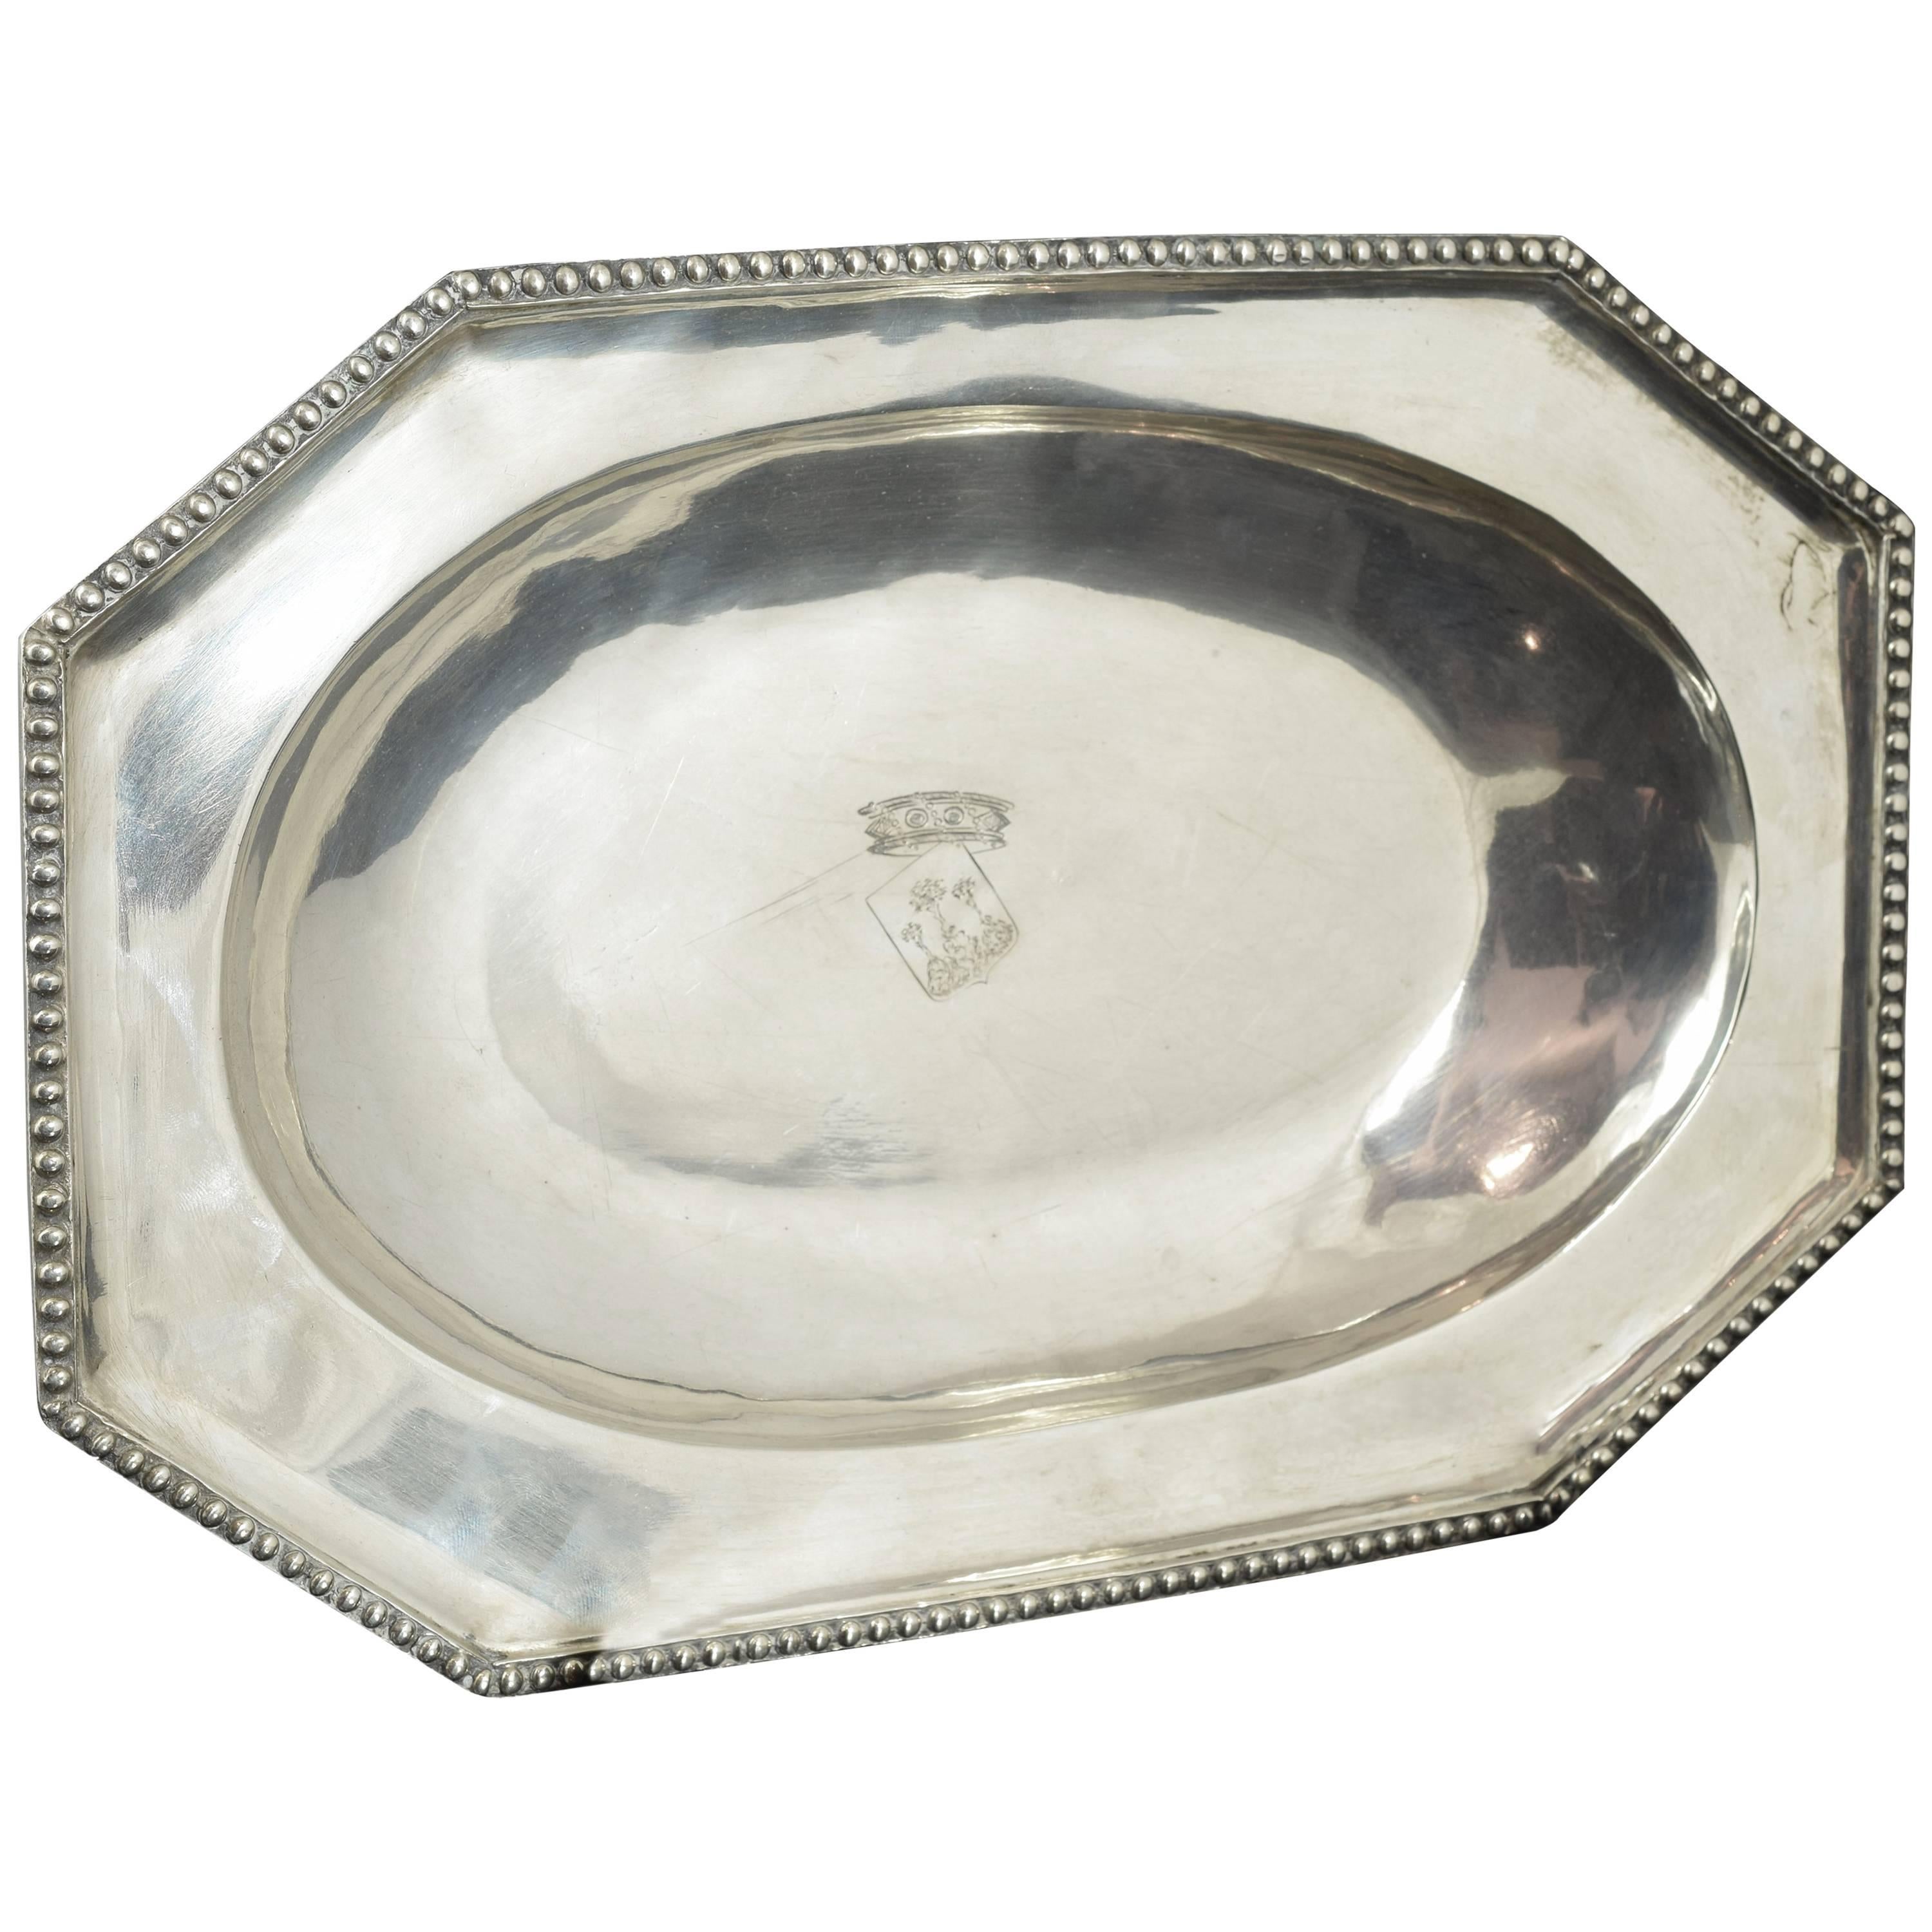 Solid Silver Tray, Barcelona, Spain, 18th Century